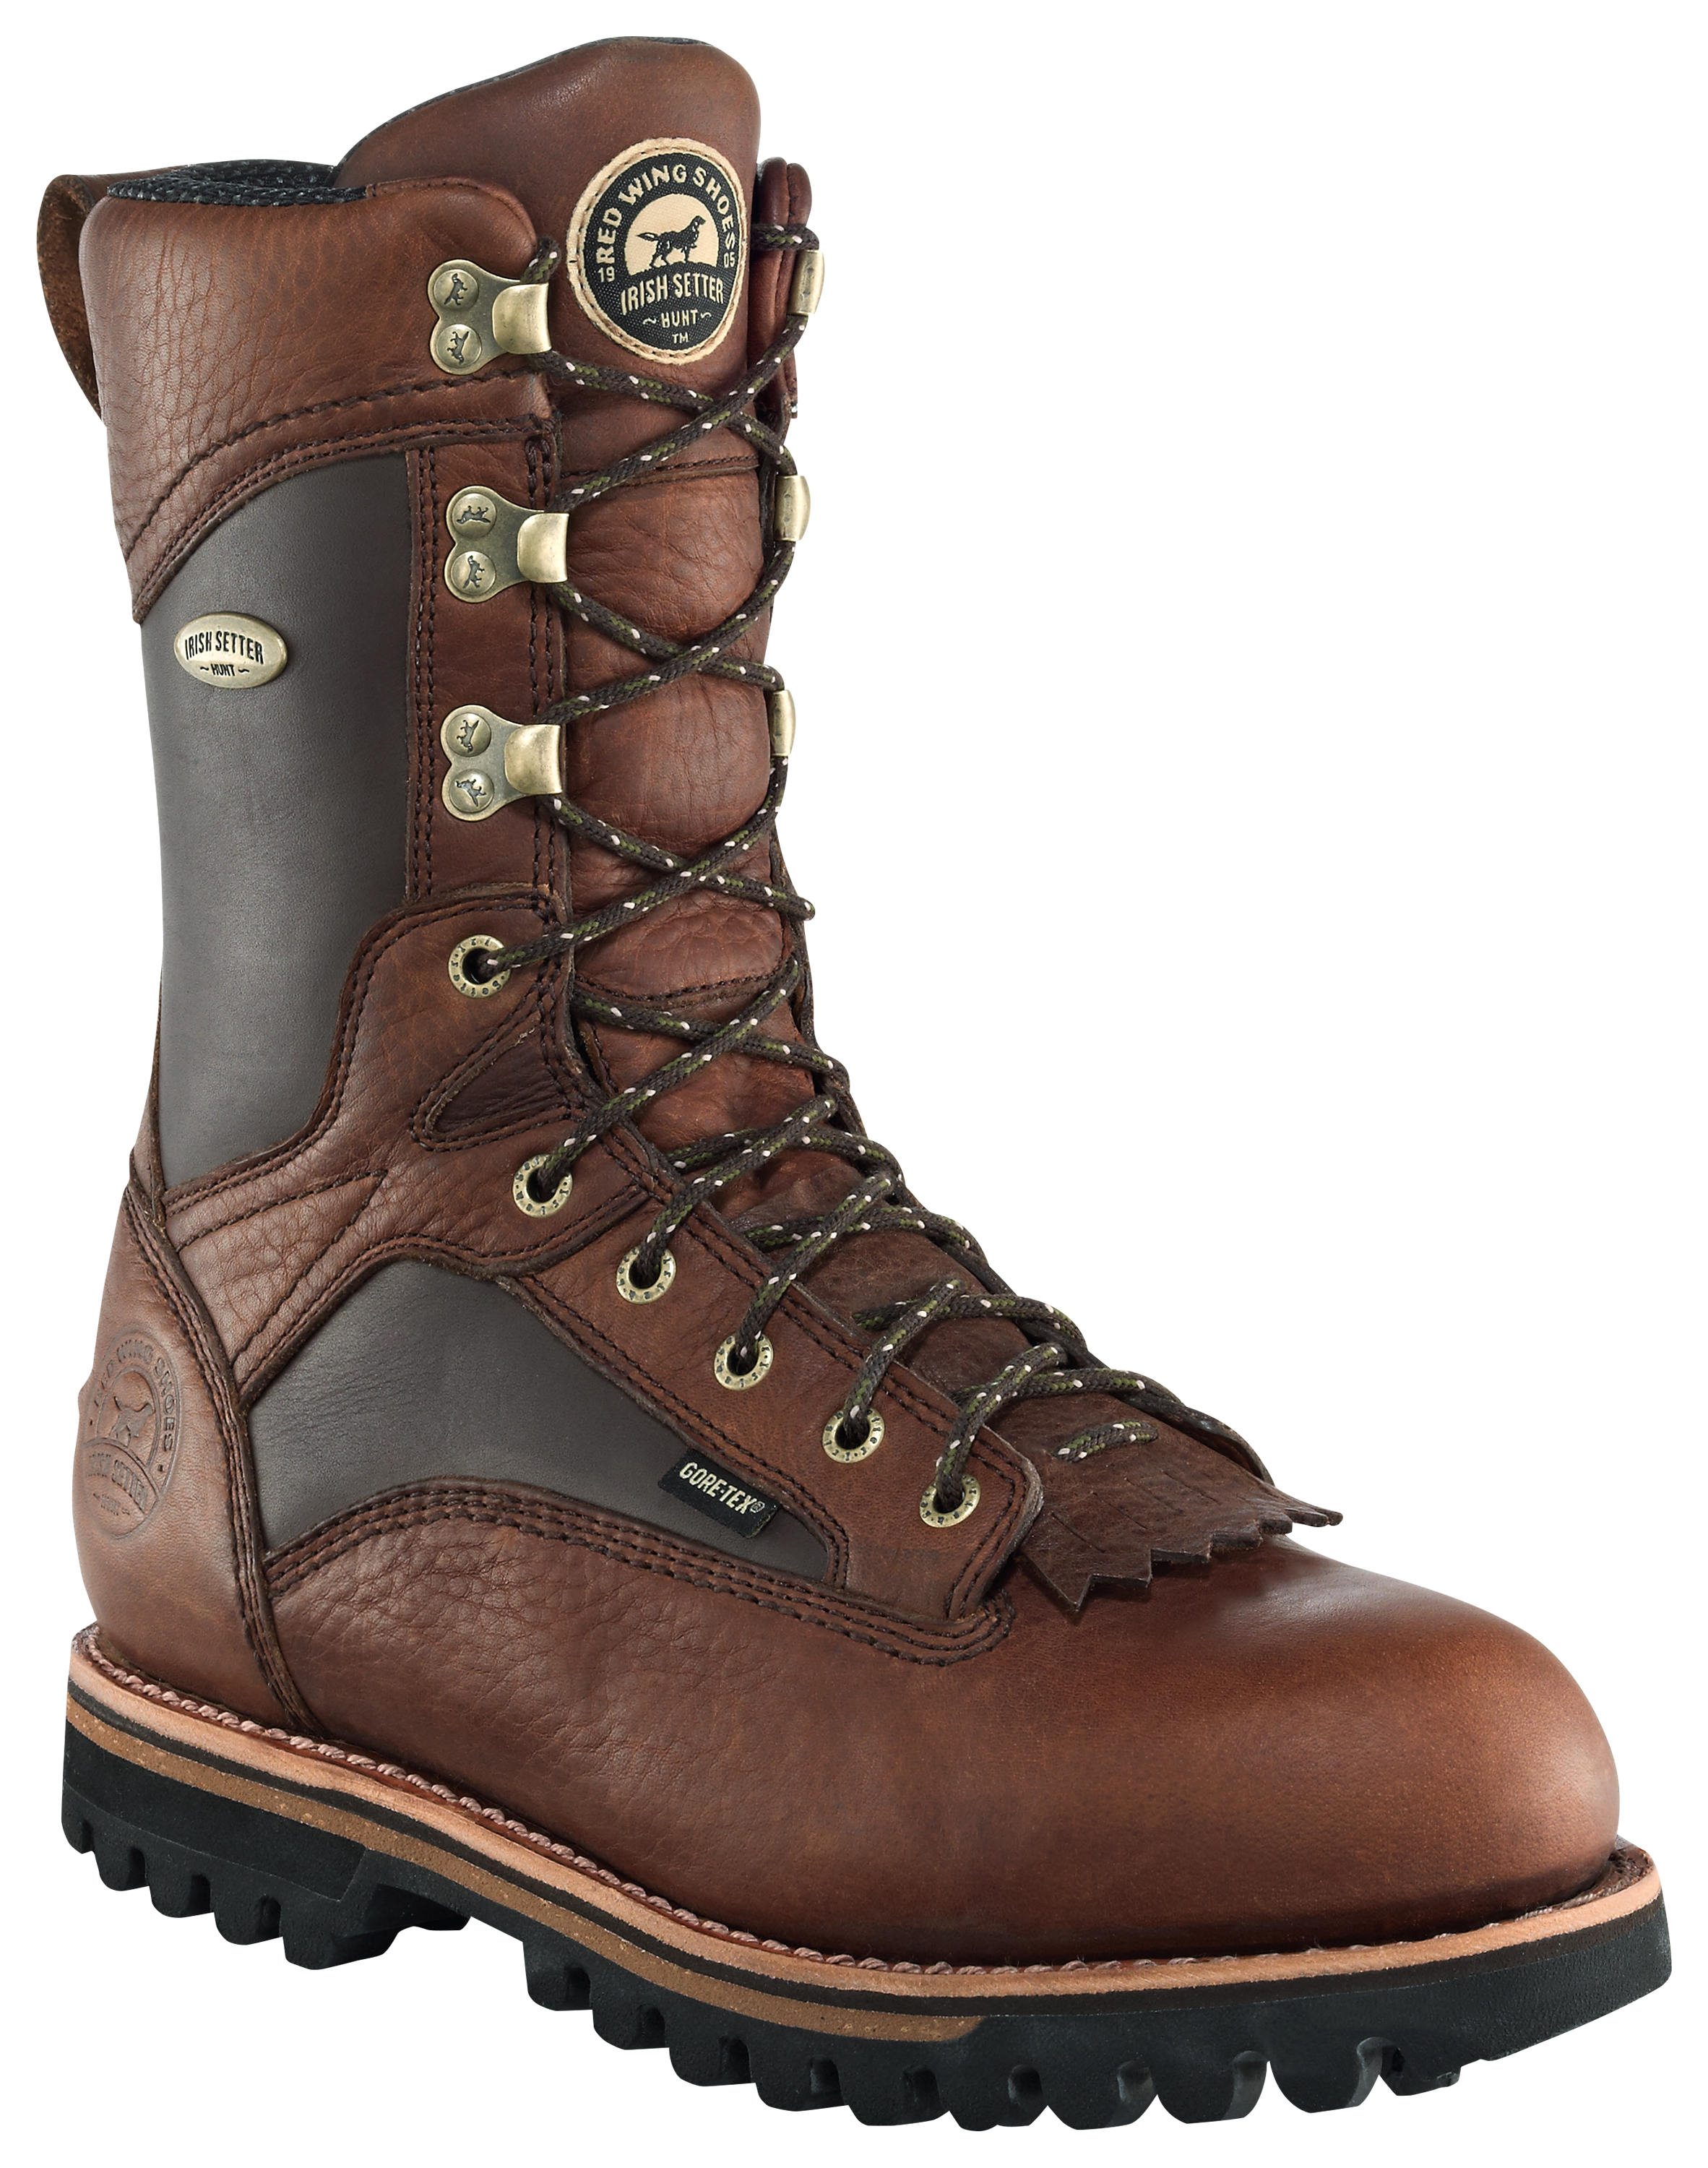 Irish Setter Elk Tracker 12'' 600 Gram Thinsulate Insulated Waterproof Hunting Boots for Men - Brown - 7.5 Wide EE